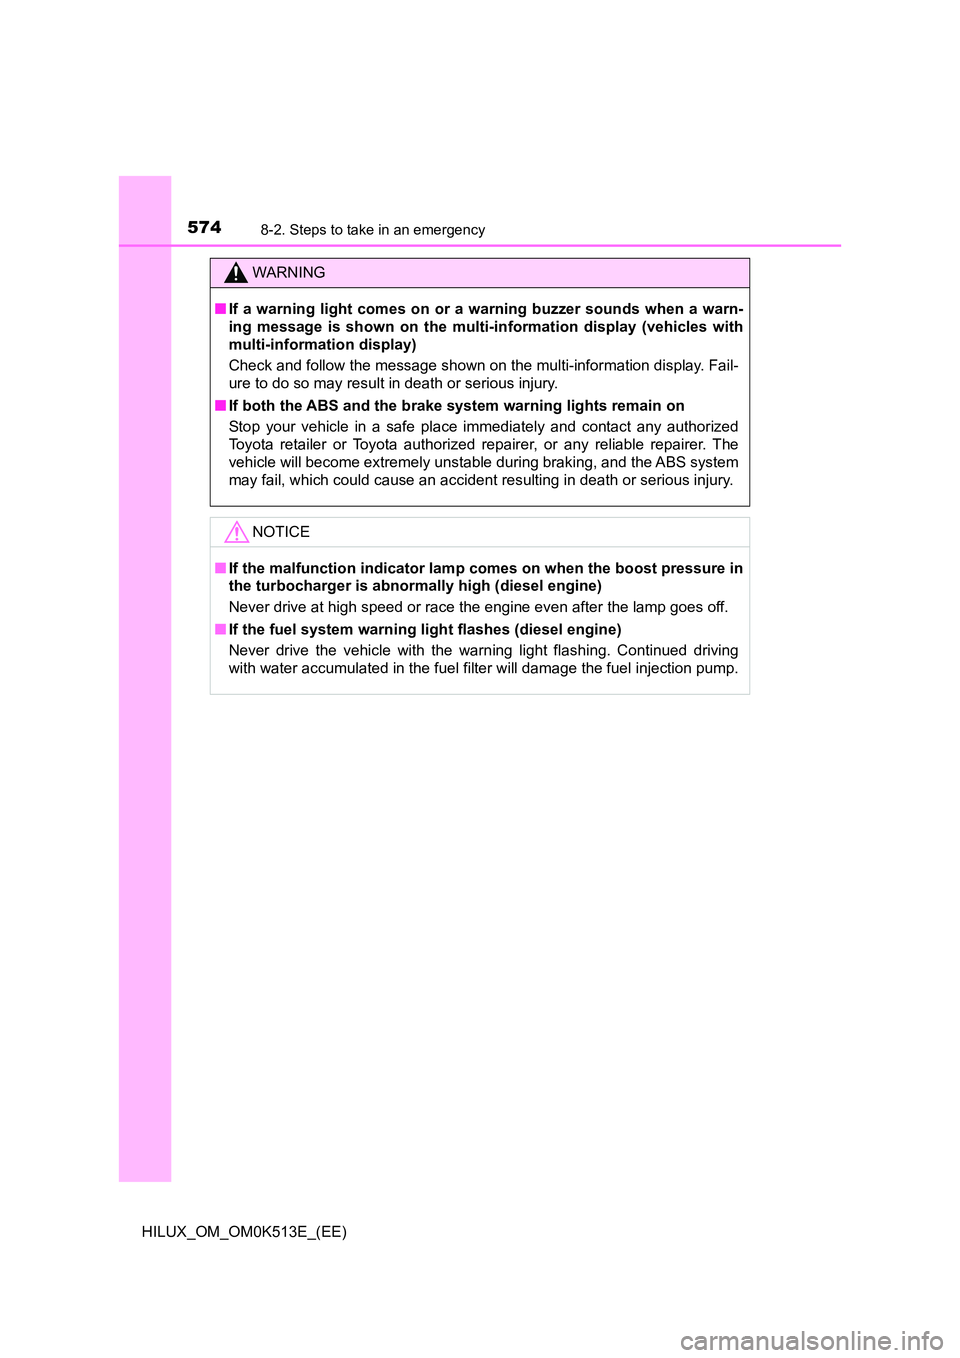 TOYOTA HILUX 2021  Owners Manual (in English) 5748-2. Steps to take in an emergency
HILUX_OM_OM0K513E_(EE)
WARNING
�QIf a warning light comes on or a warning buzzer sounds when a warn- 
ing message is shown on the multi-information display (vehic